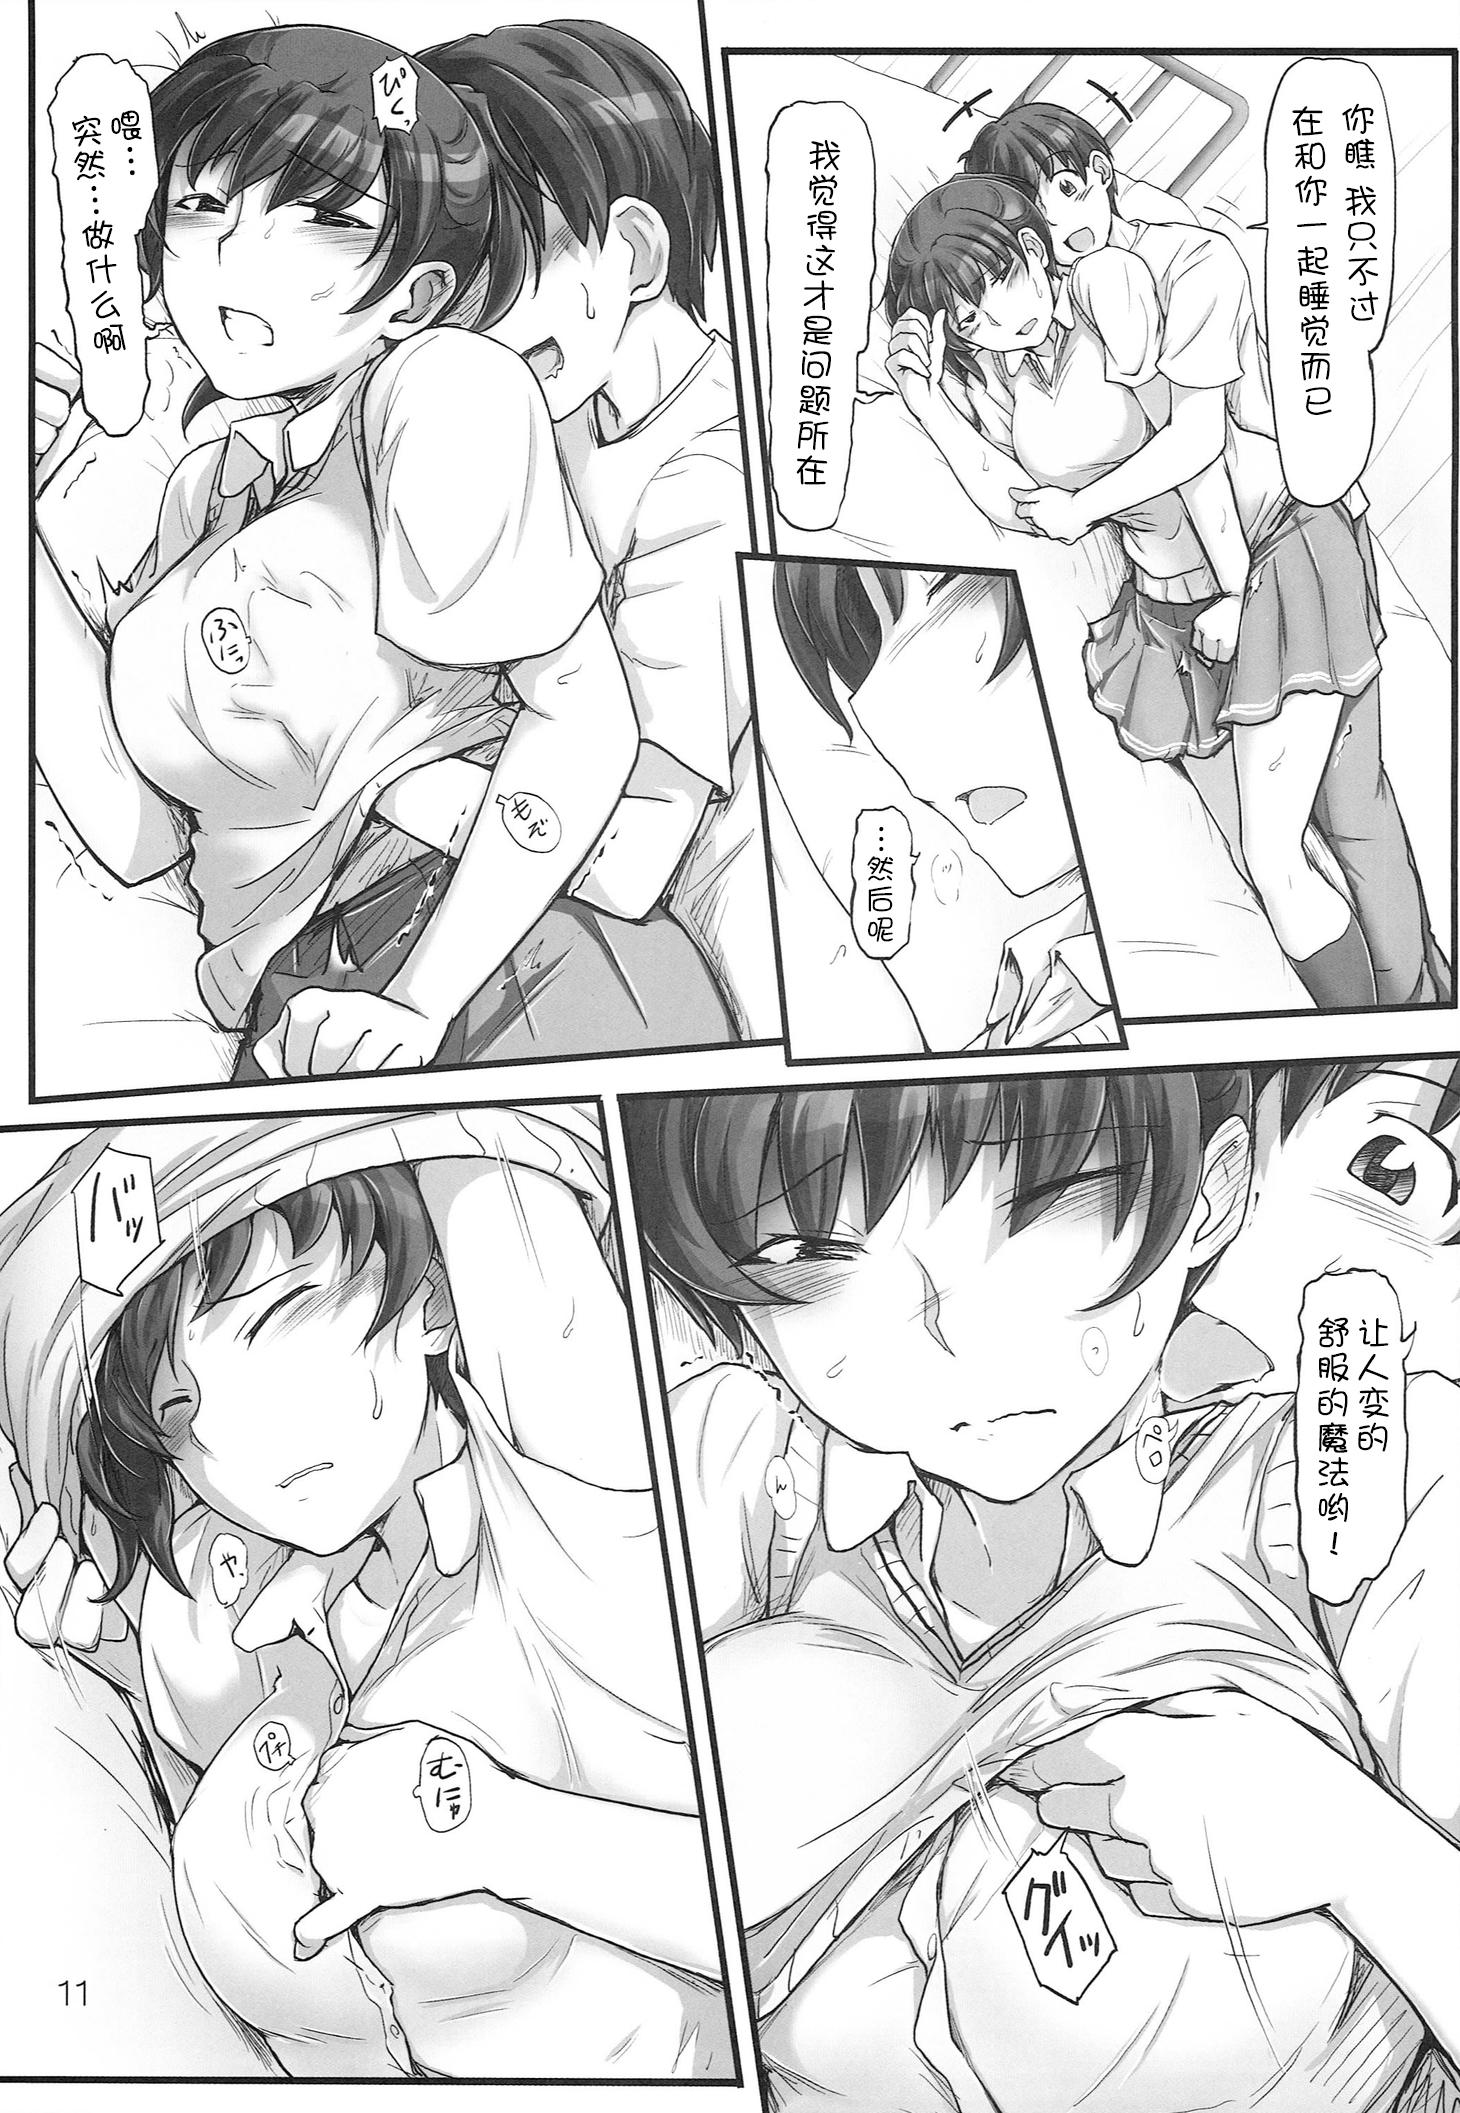 Fun sweet training - Amagami Calle - Page 11